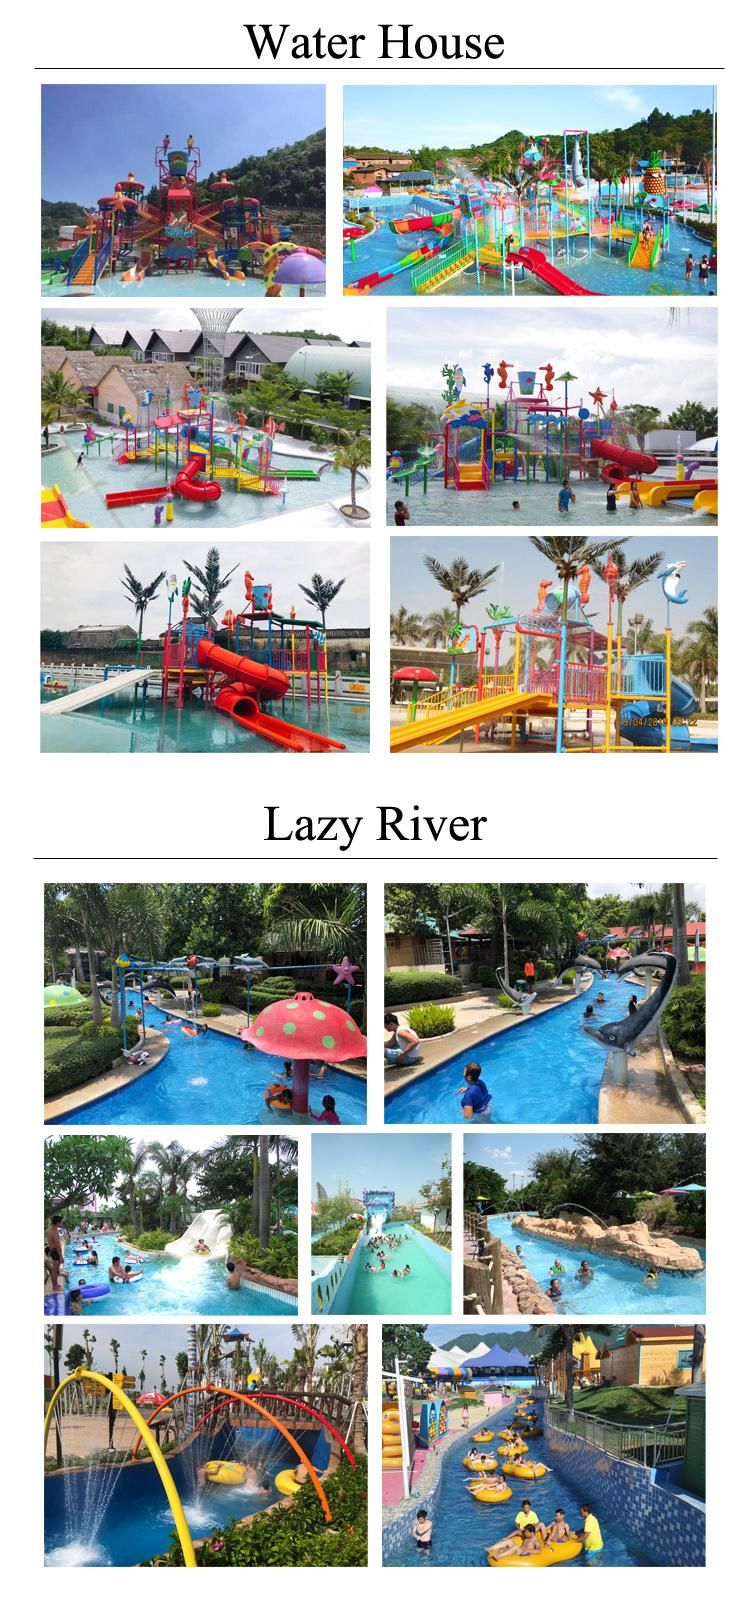 Water Park Equipment Artificial Wave Pool with Blower